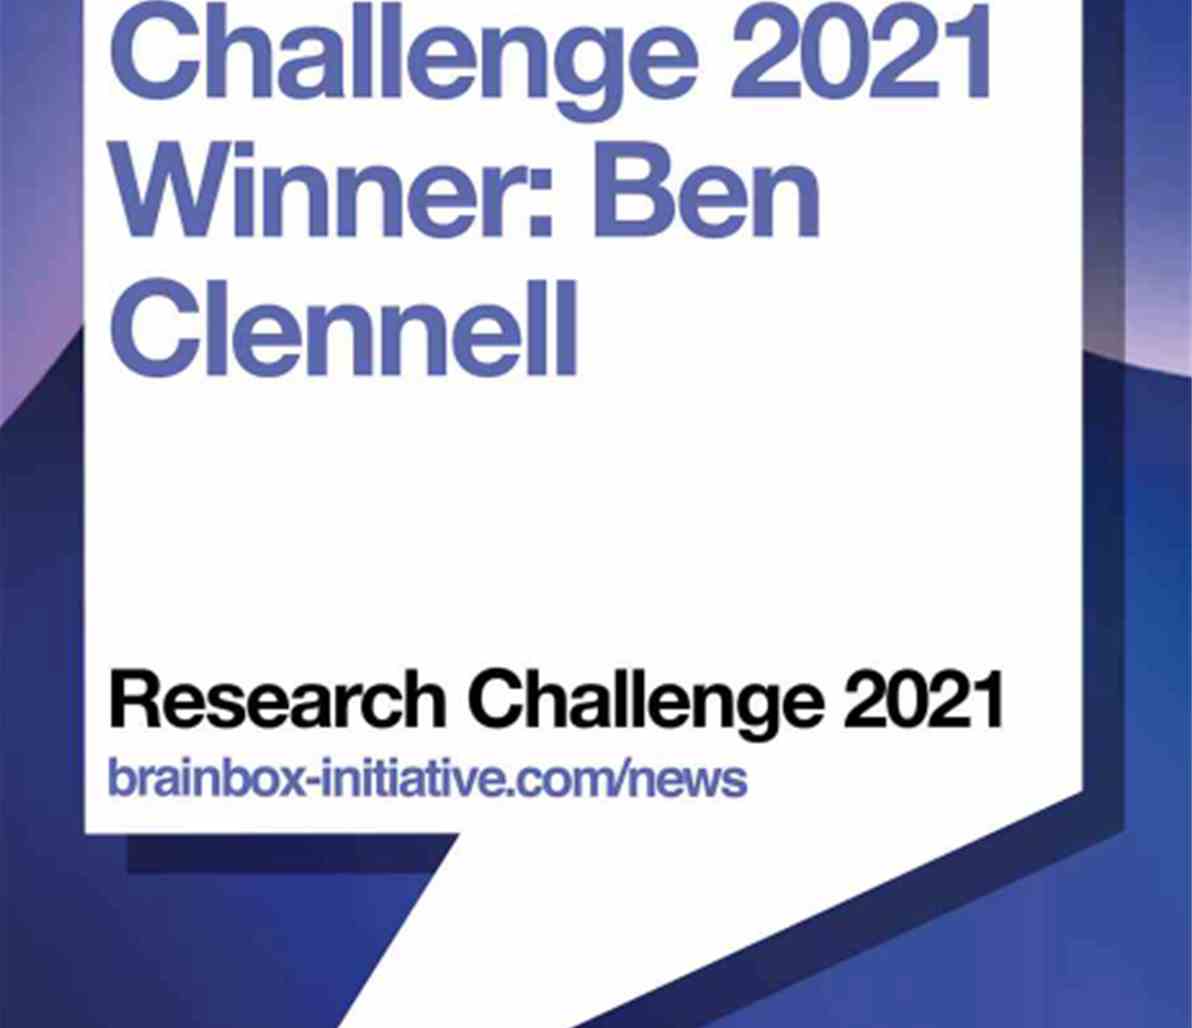 Ben Clennell